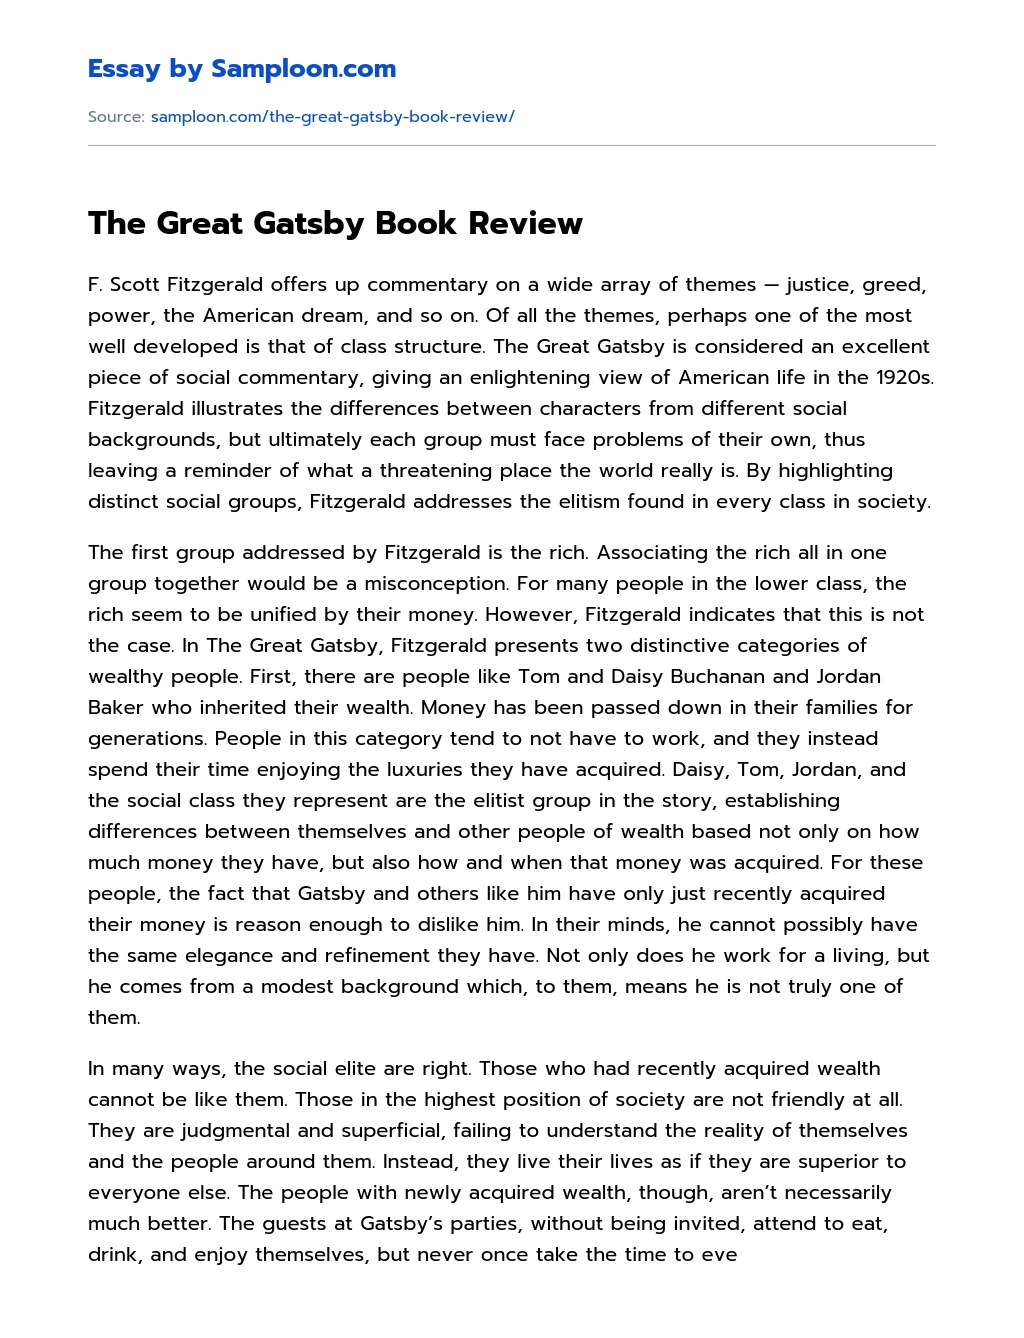 The Great Gatsby Book Review essay